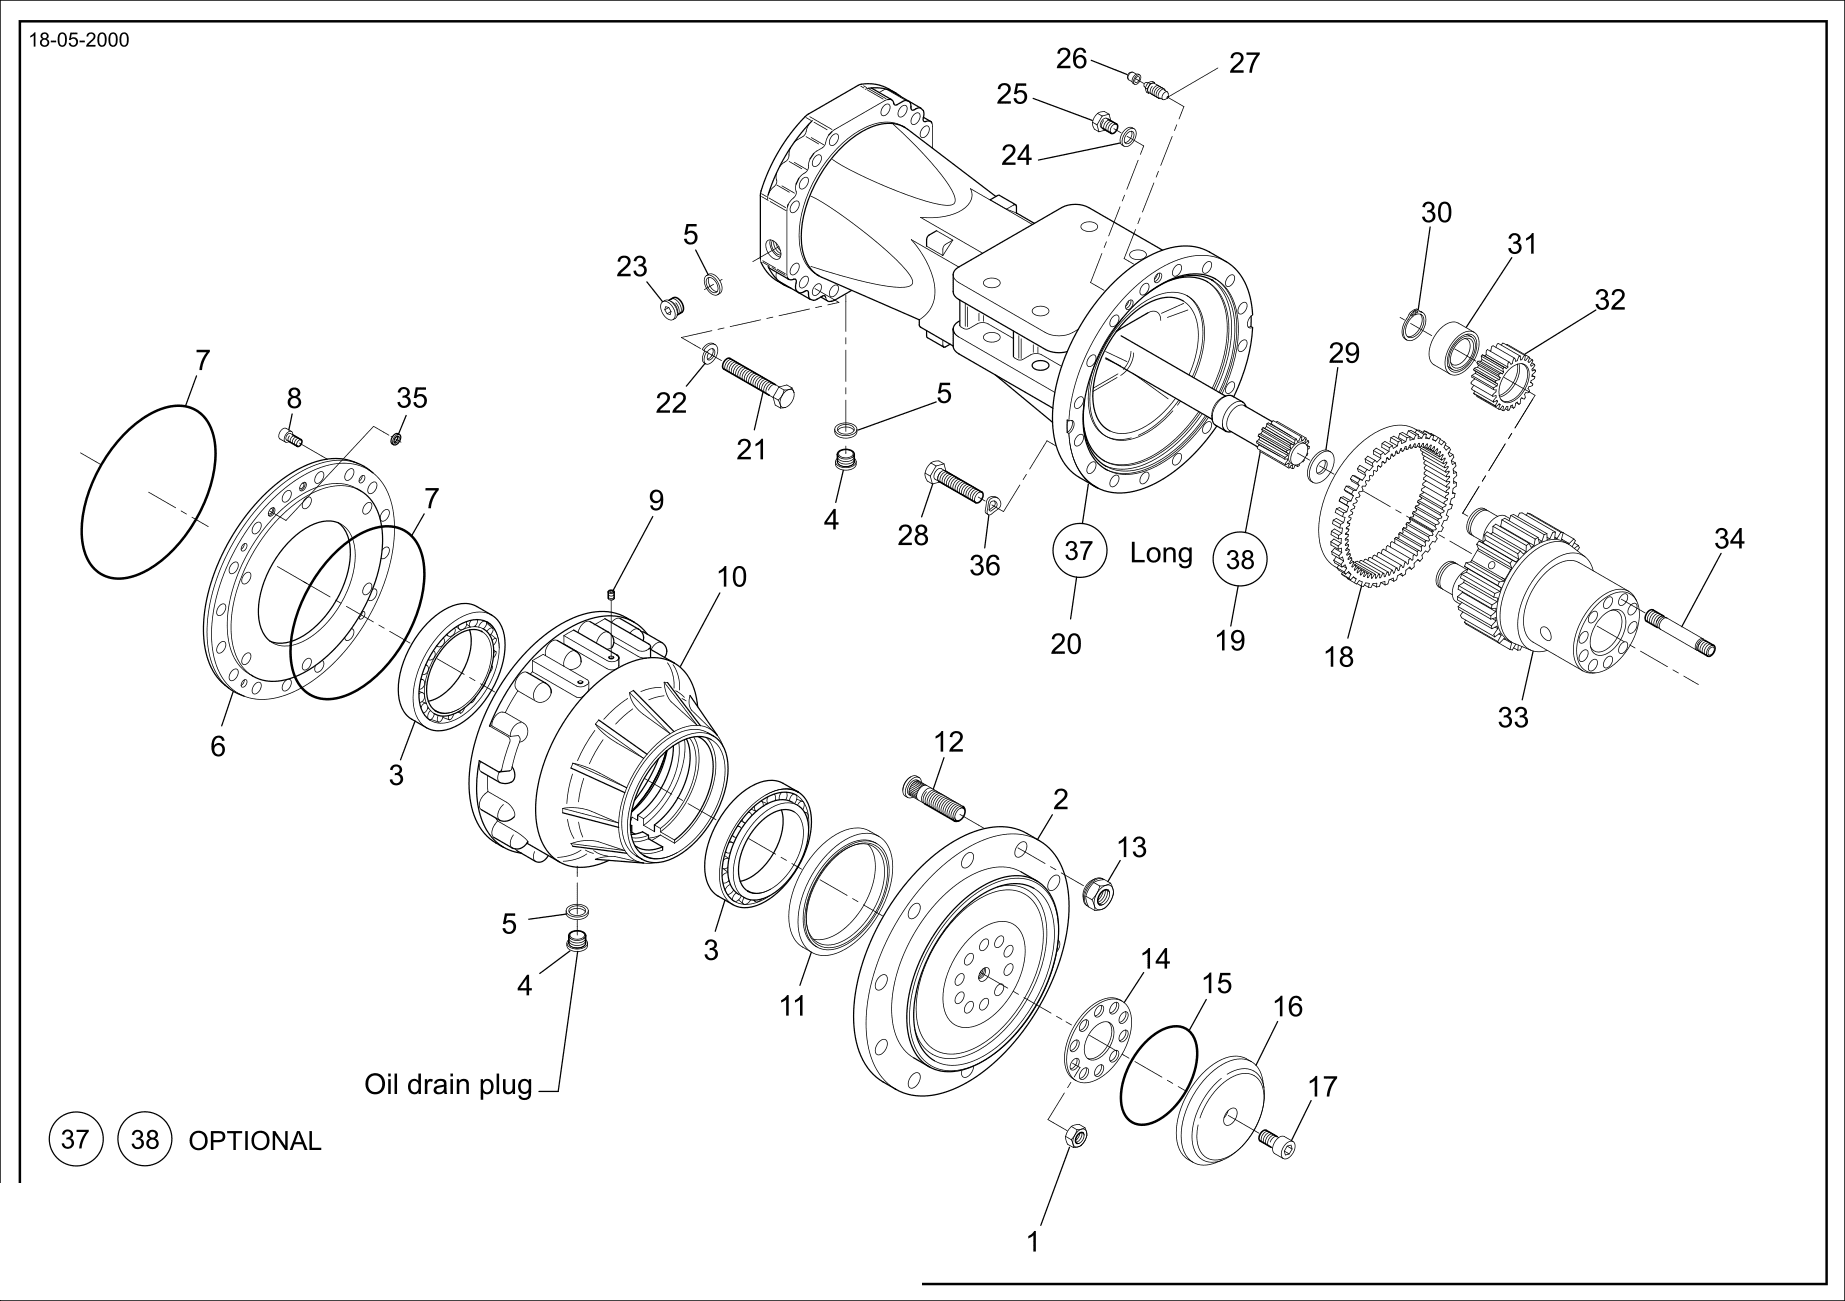 drawing for CNH NEW HOLLAND 71477144 - HALF SHAFT (figure 3)